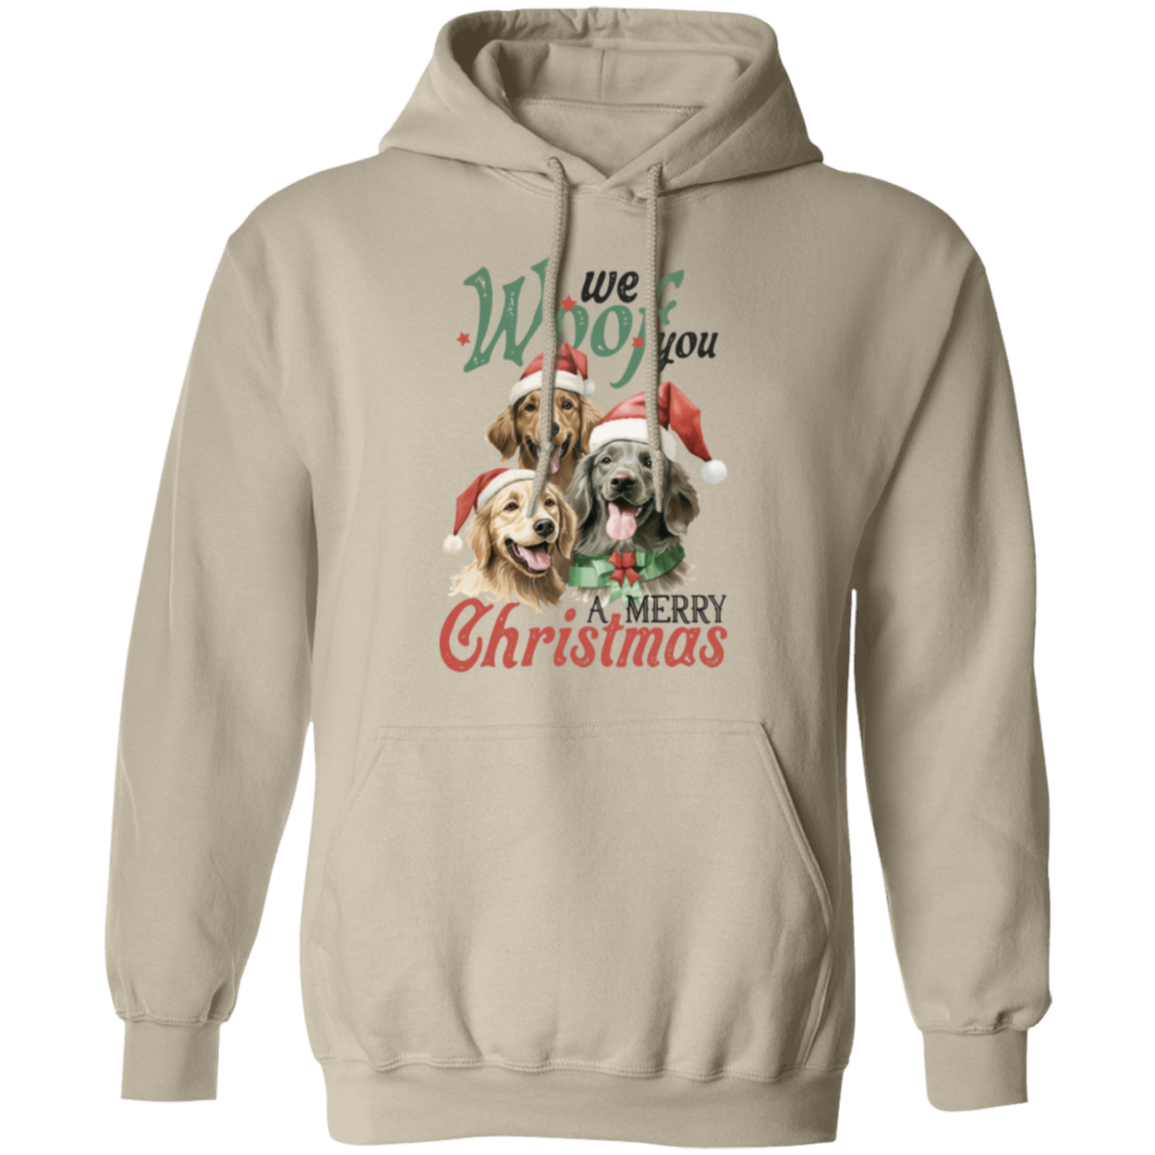 We Woof You A Merry Christmas - Unisex Pullover Hoodie